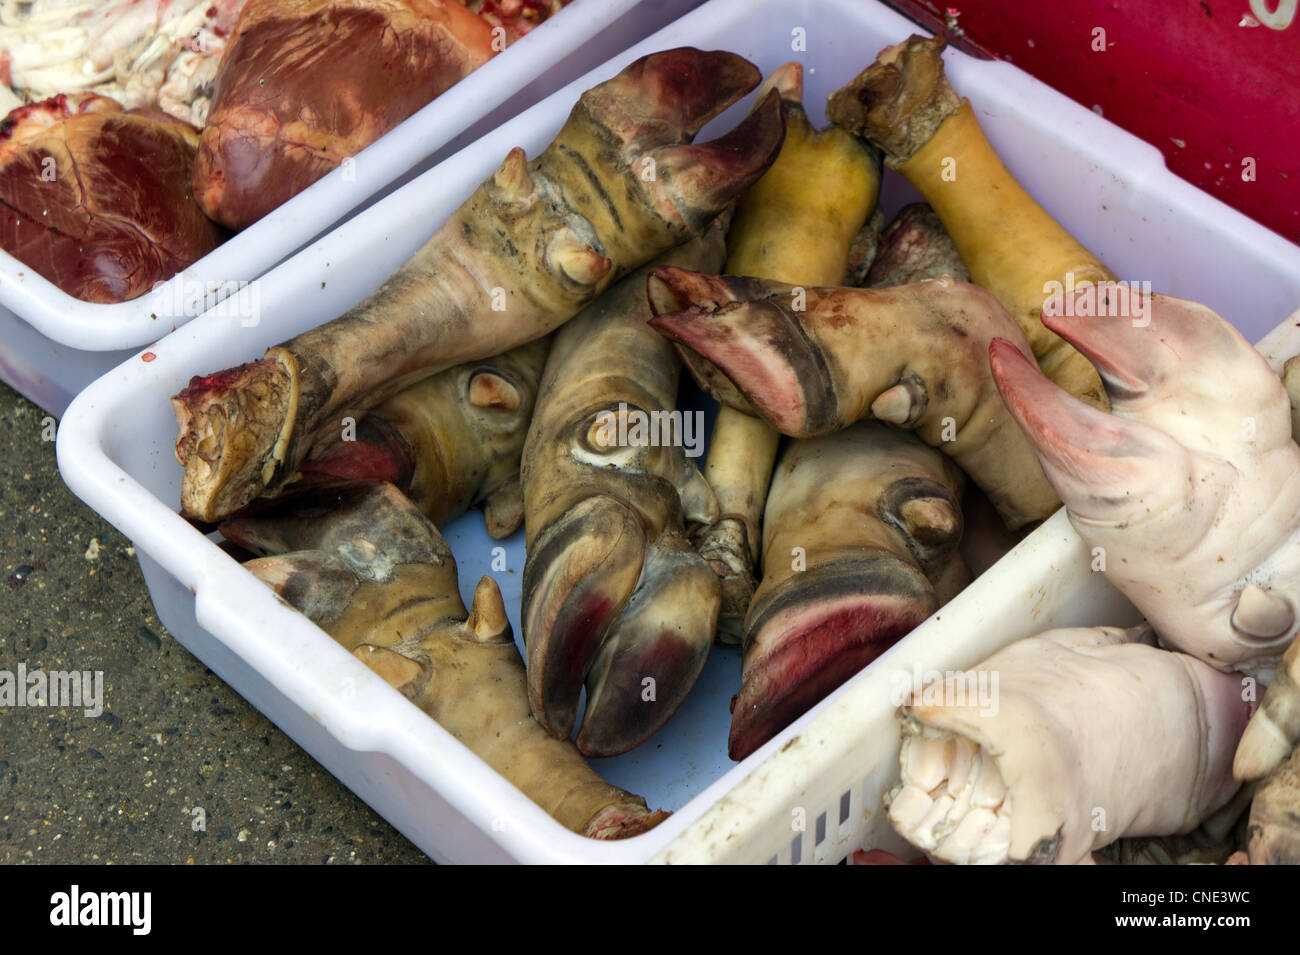 Pigs trotters for sale at a market in Chengdu, China Stock Photo